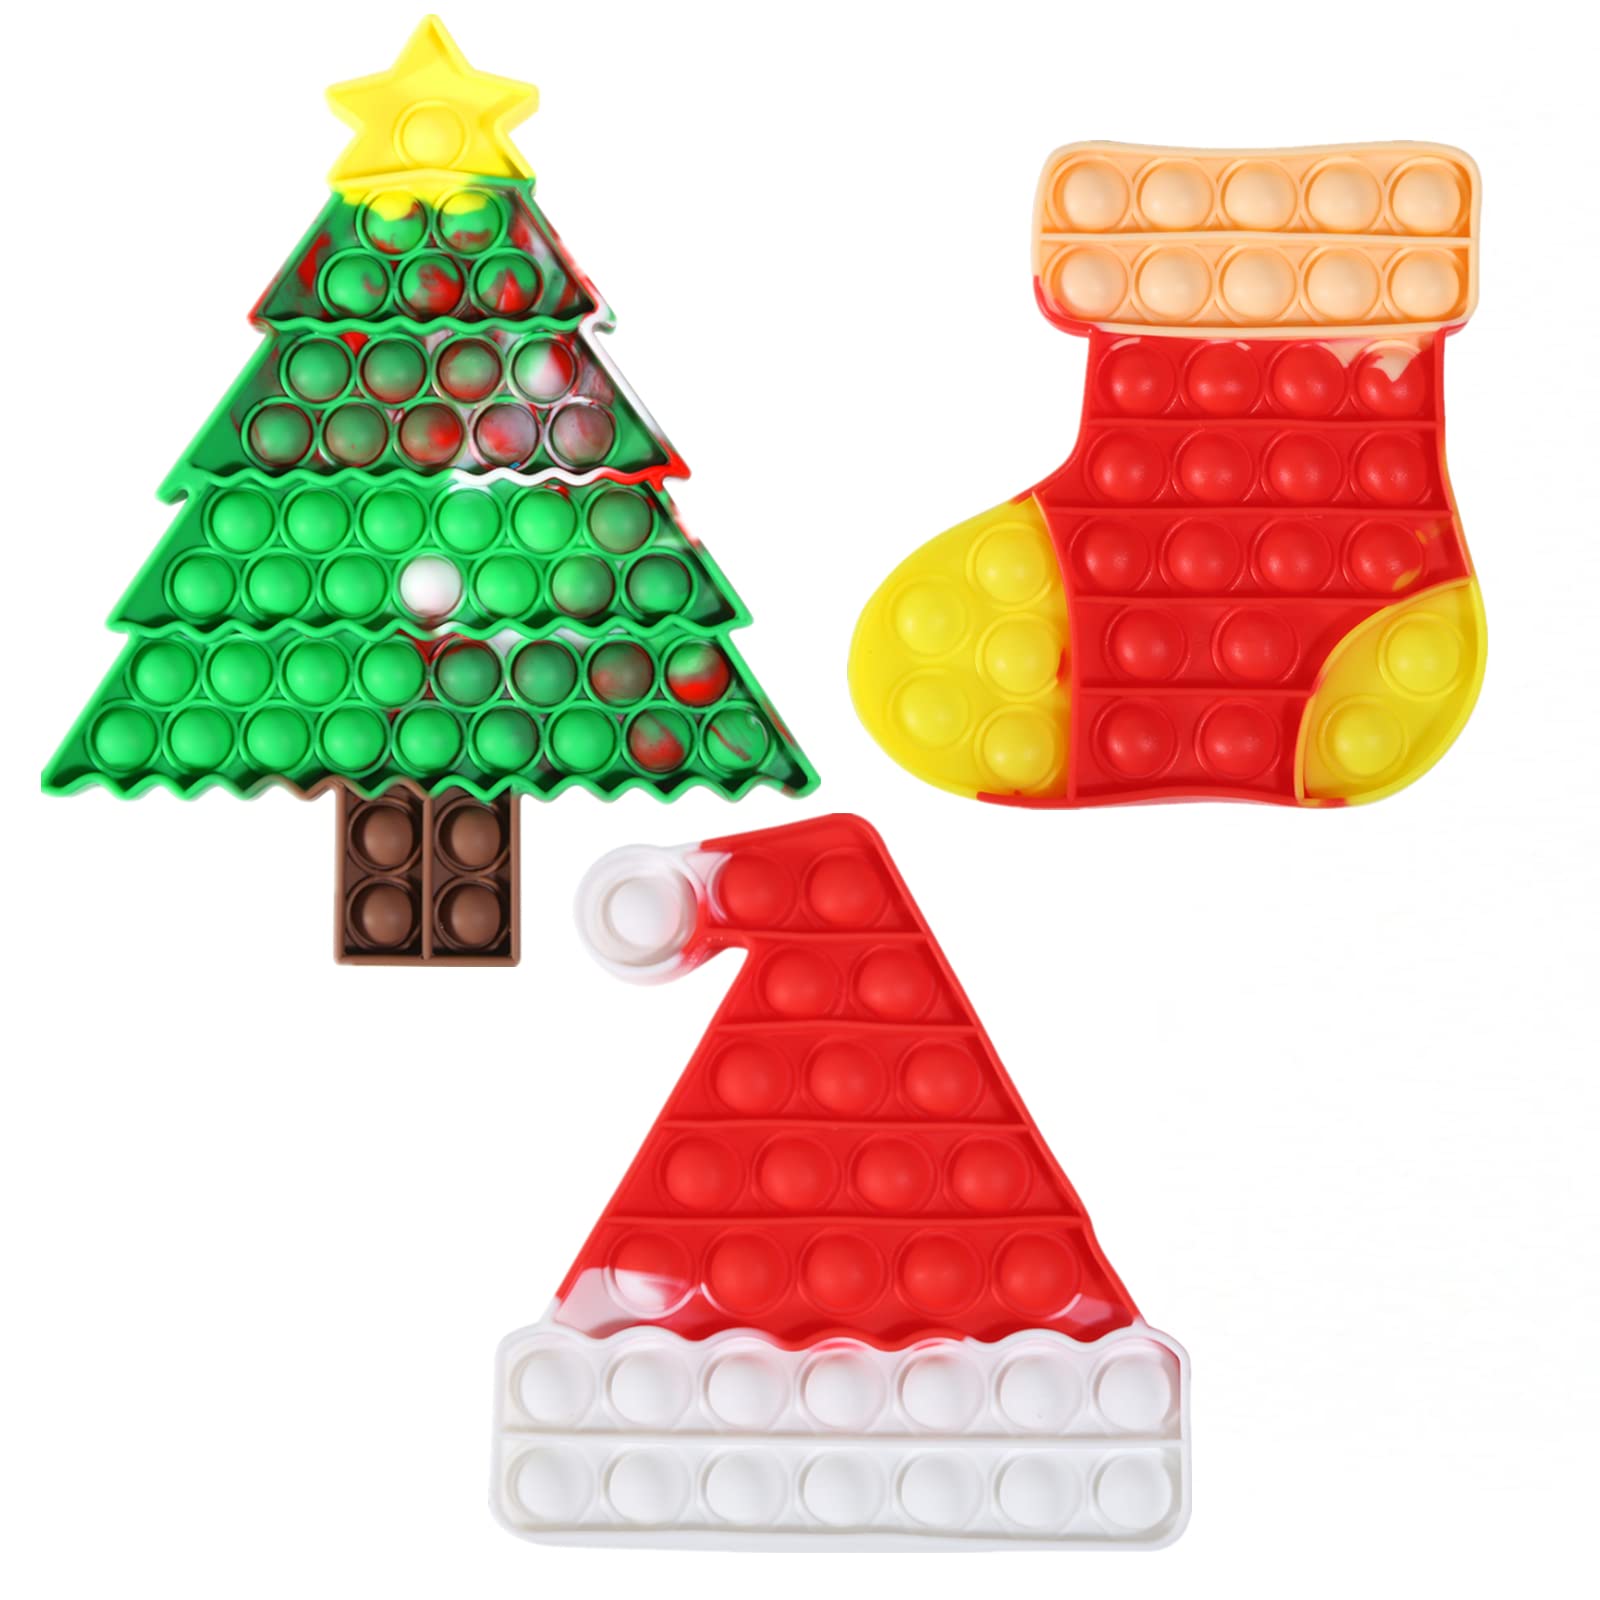 Hasoar 3 Pack Christmas Fidget Toys Set, Sensory Fidget Packs Christmas Tree, Hat and Stocking Silicone Stress Reliever Toy, Xmas Party Game Decor Gifts Sensory Toy for Kids